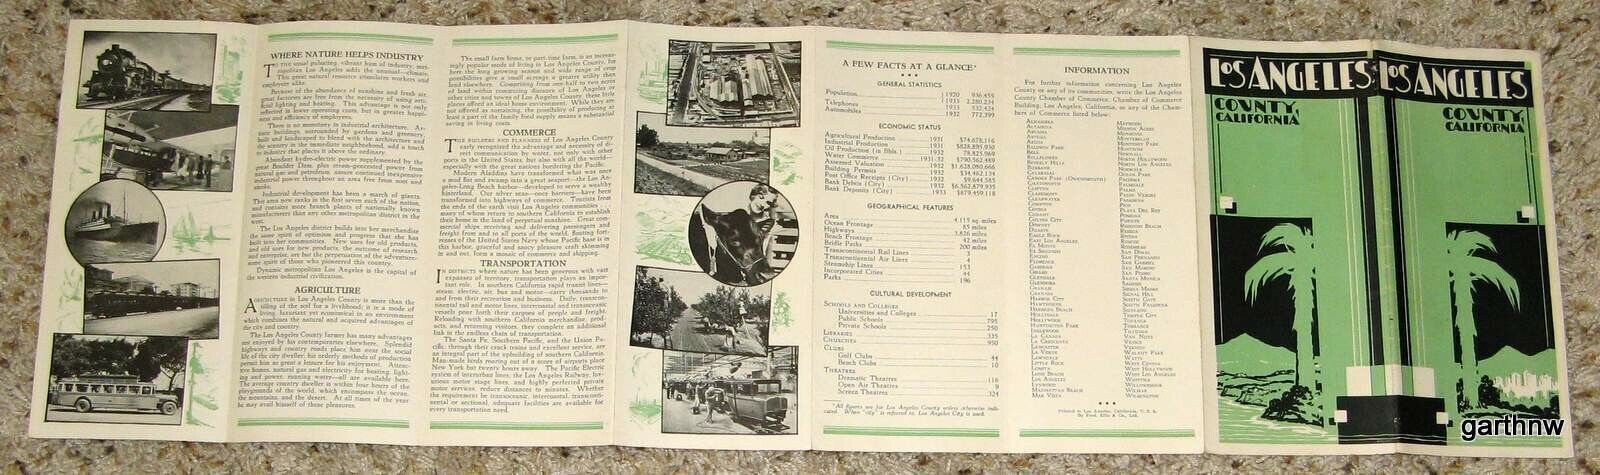 LOS ANGELES COUNTY ca 1934 PICTORIAL GUIDE PHOTOS & FACTS CITIES BEACHES CULTURE